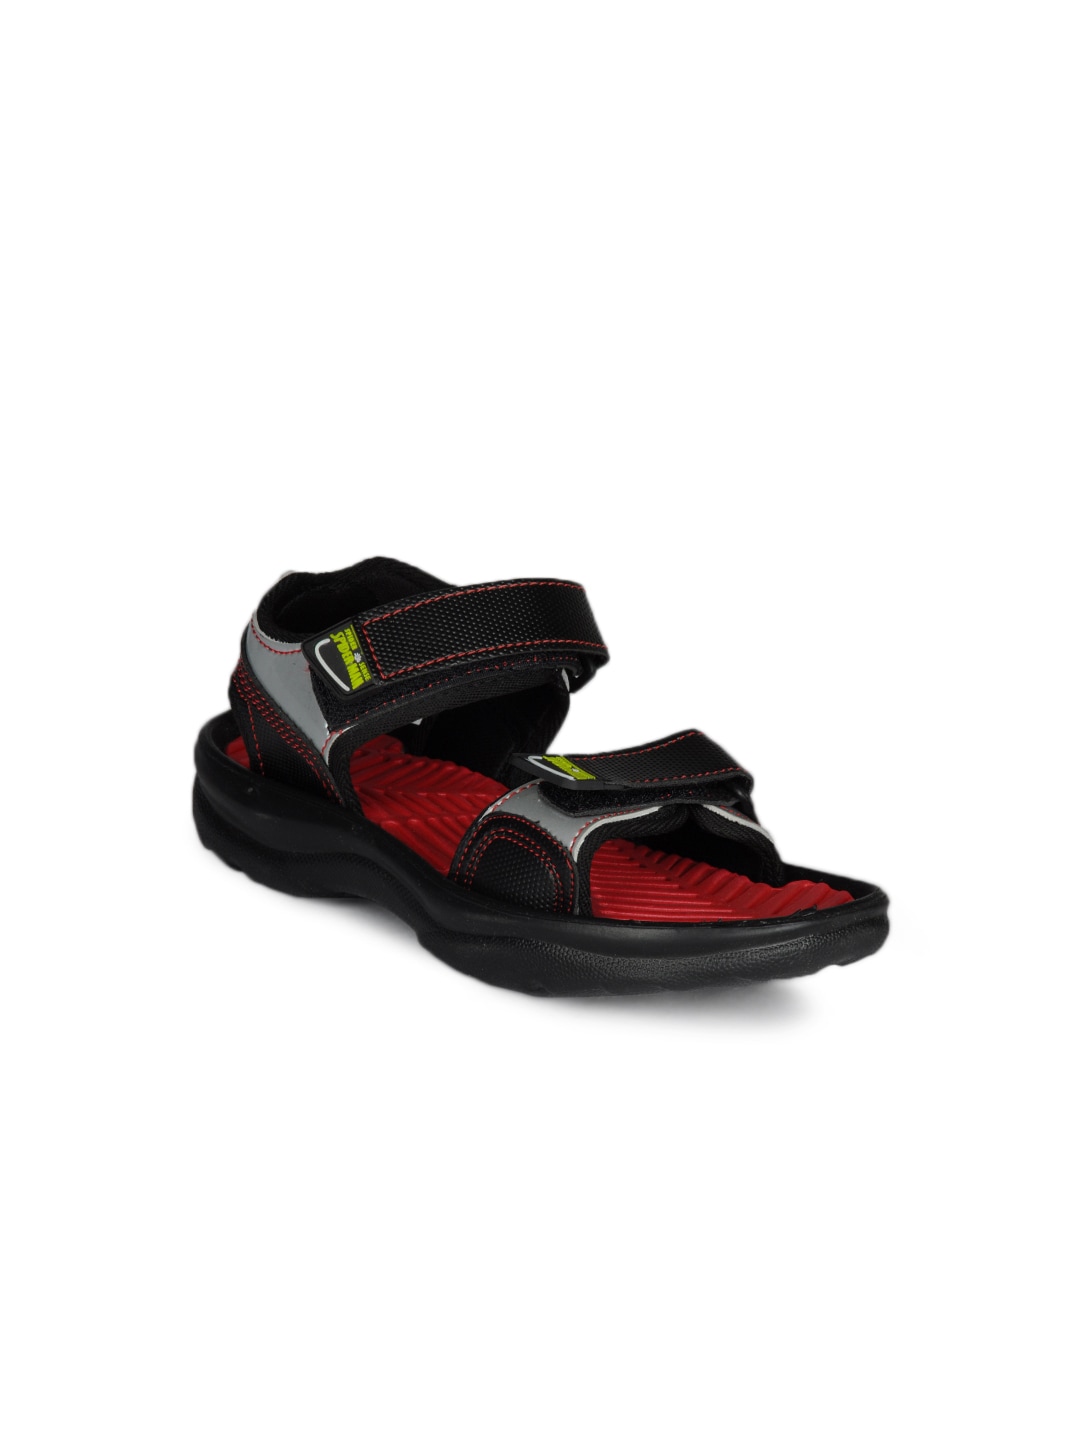 Marvel Boys Red and Black Sandals